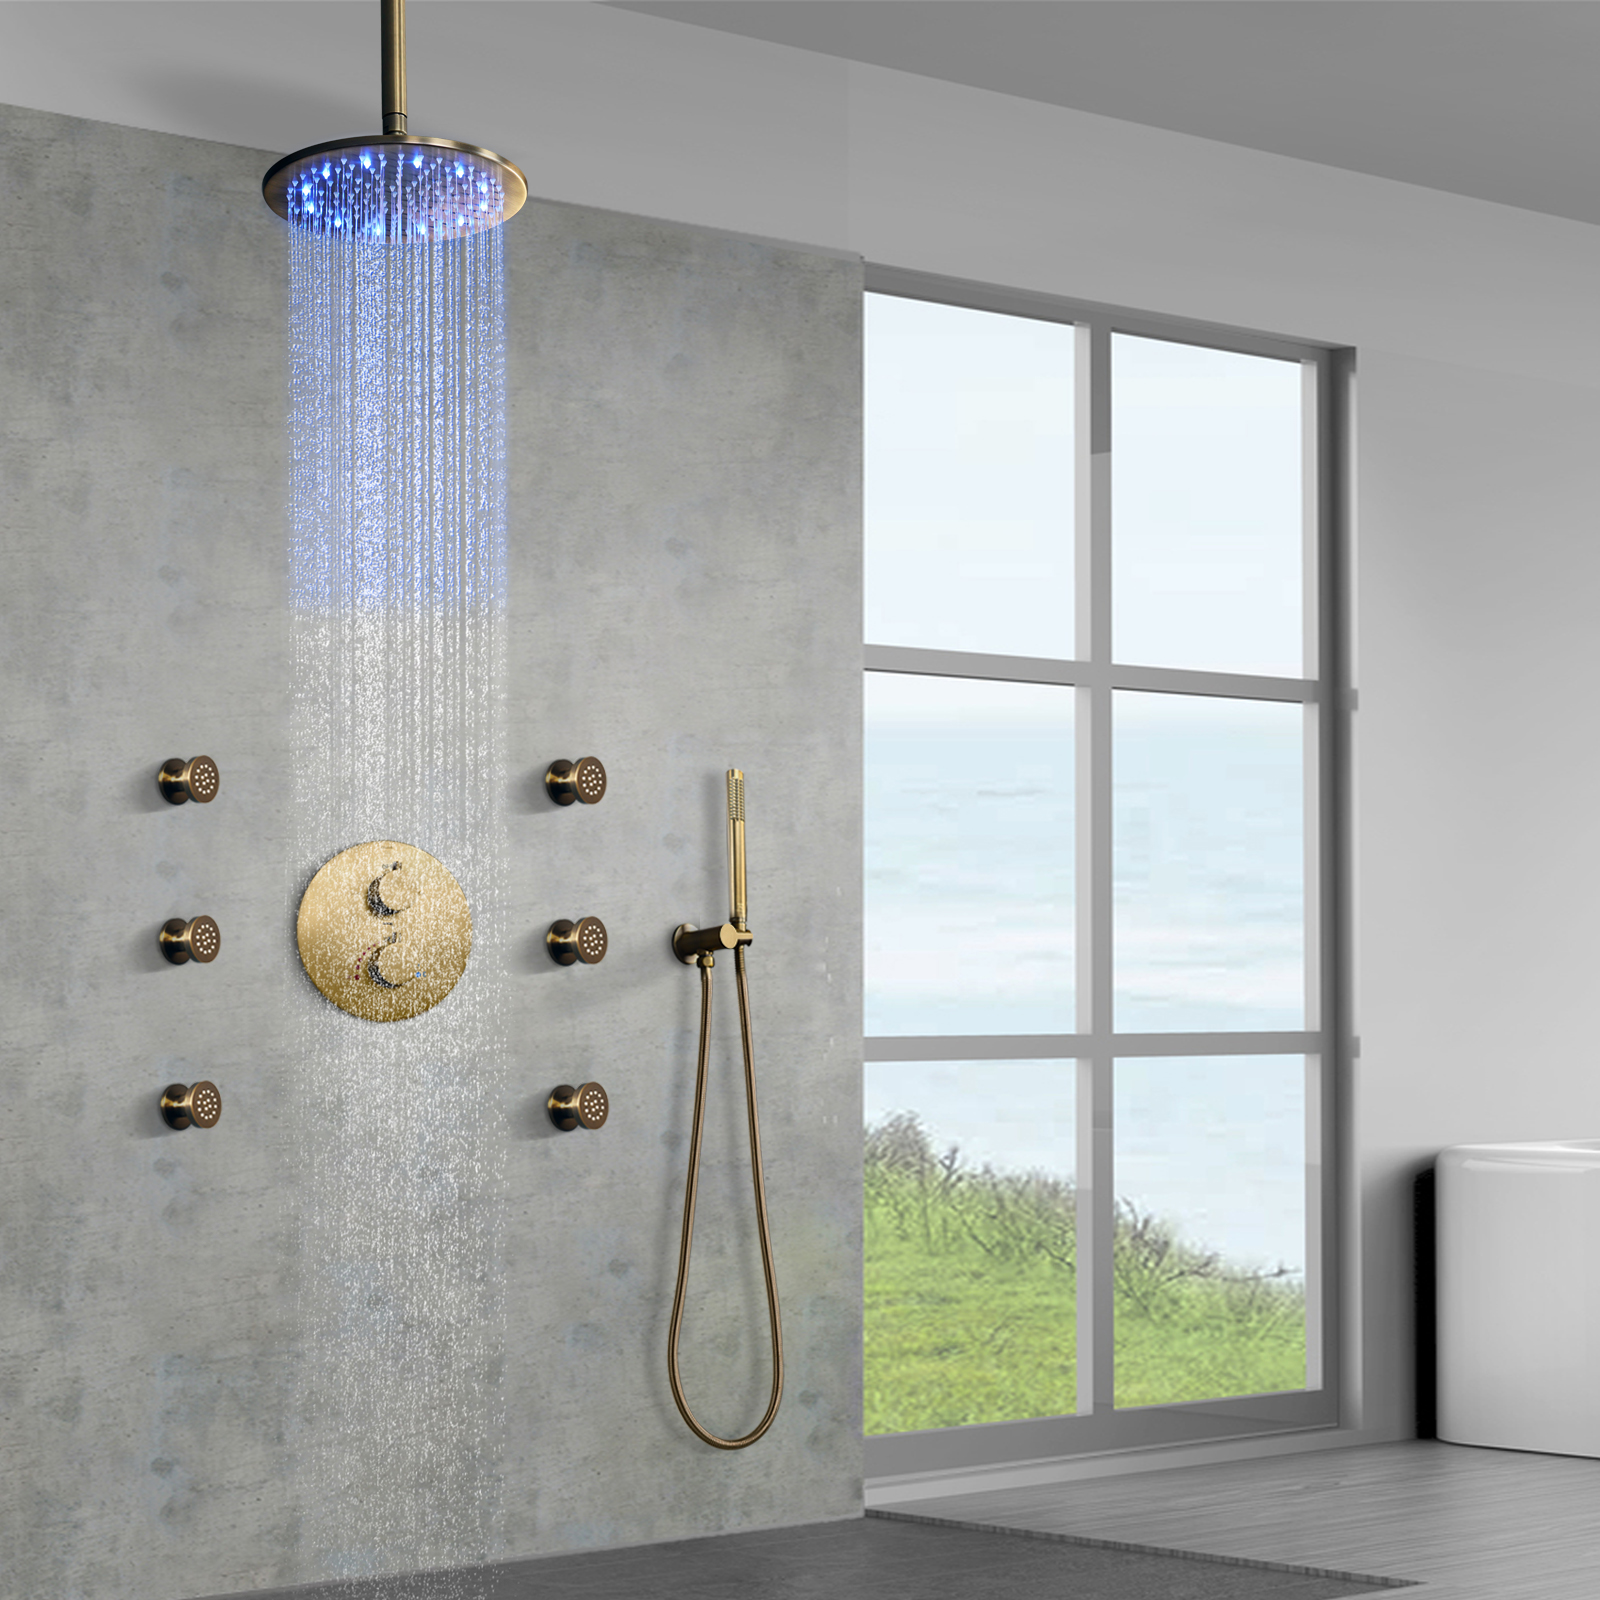 Illuminate Your Shower Experience with LED Shower Heads